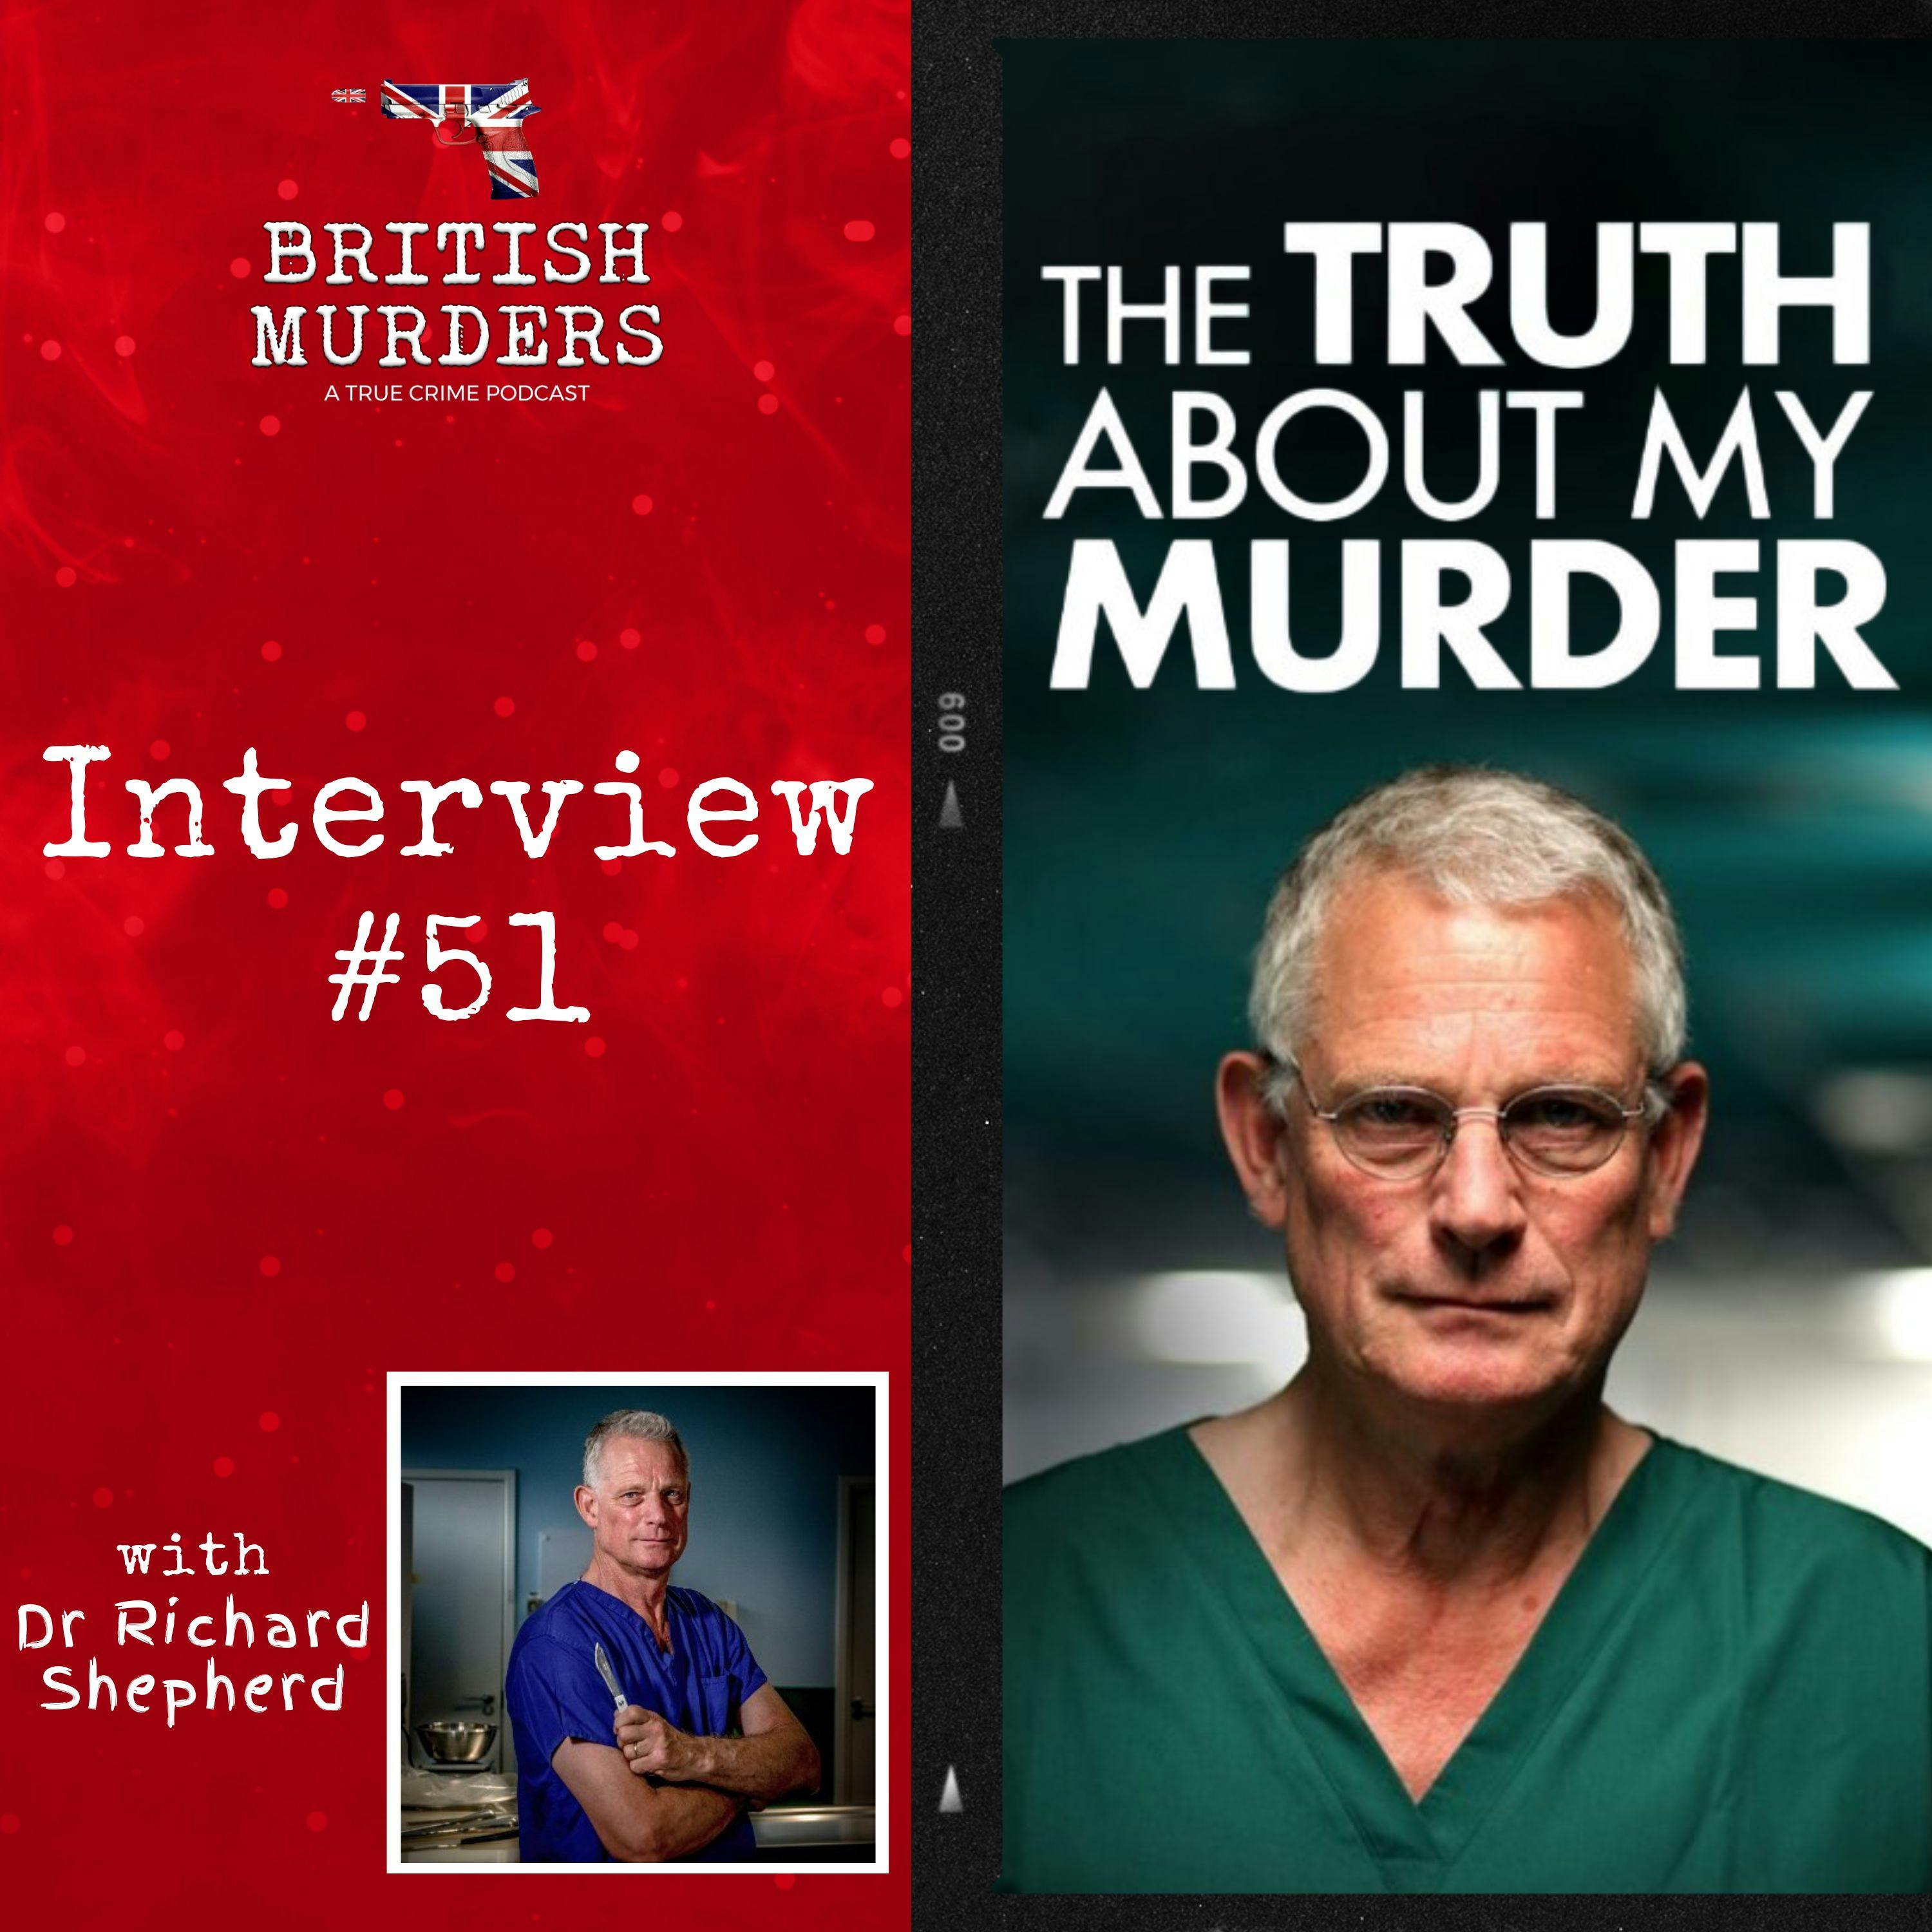 Interview #51 | The Truth About My Murder: Dr Richard Shepherd discusses the TRUE CRIME original series’ second season